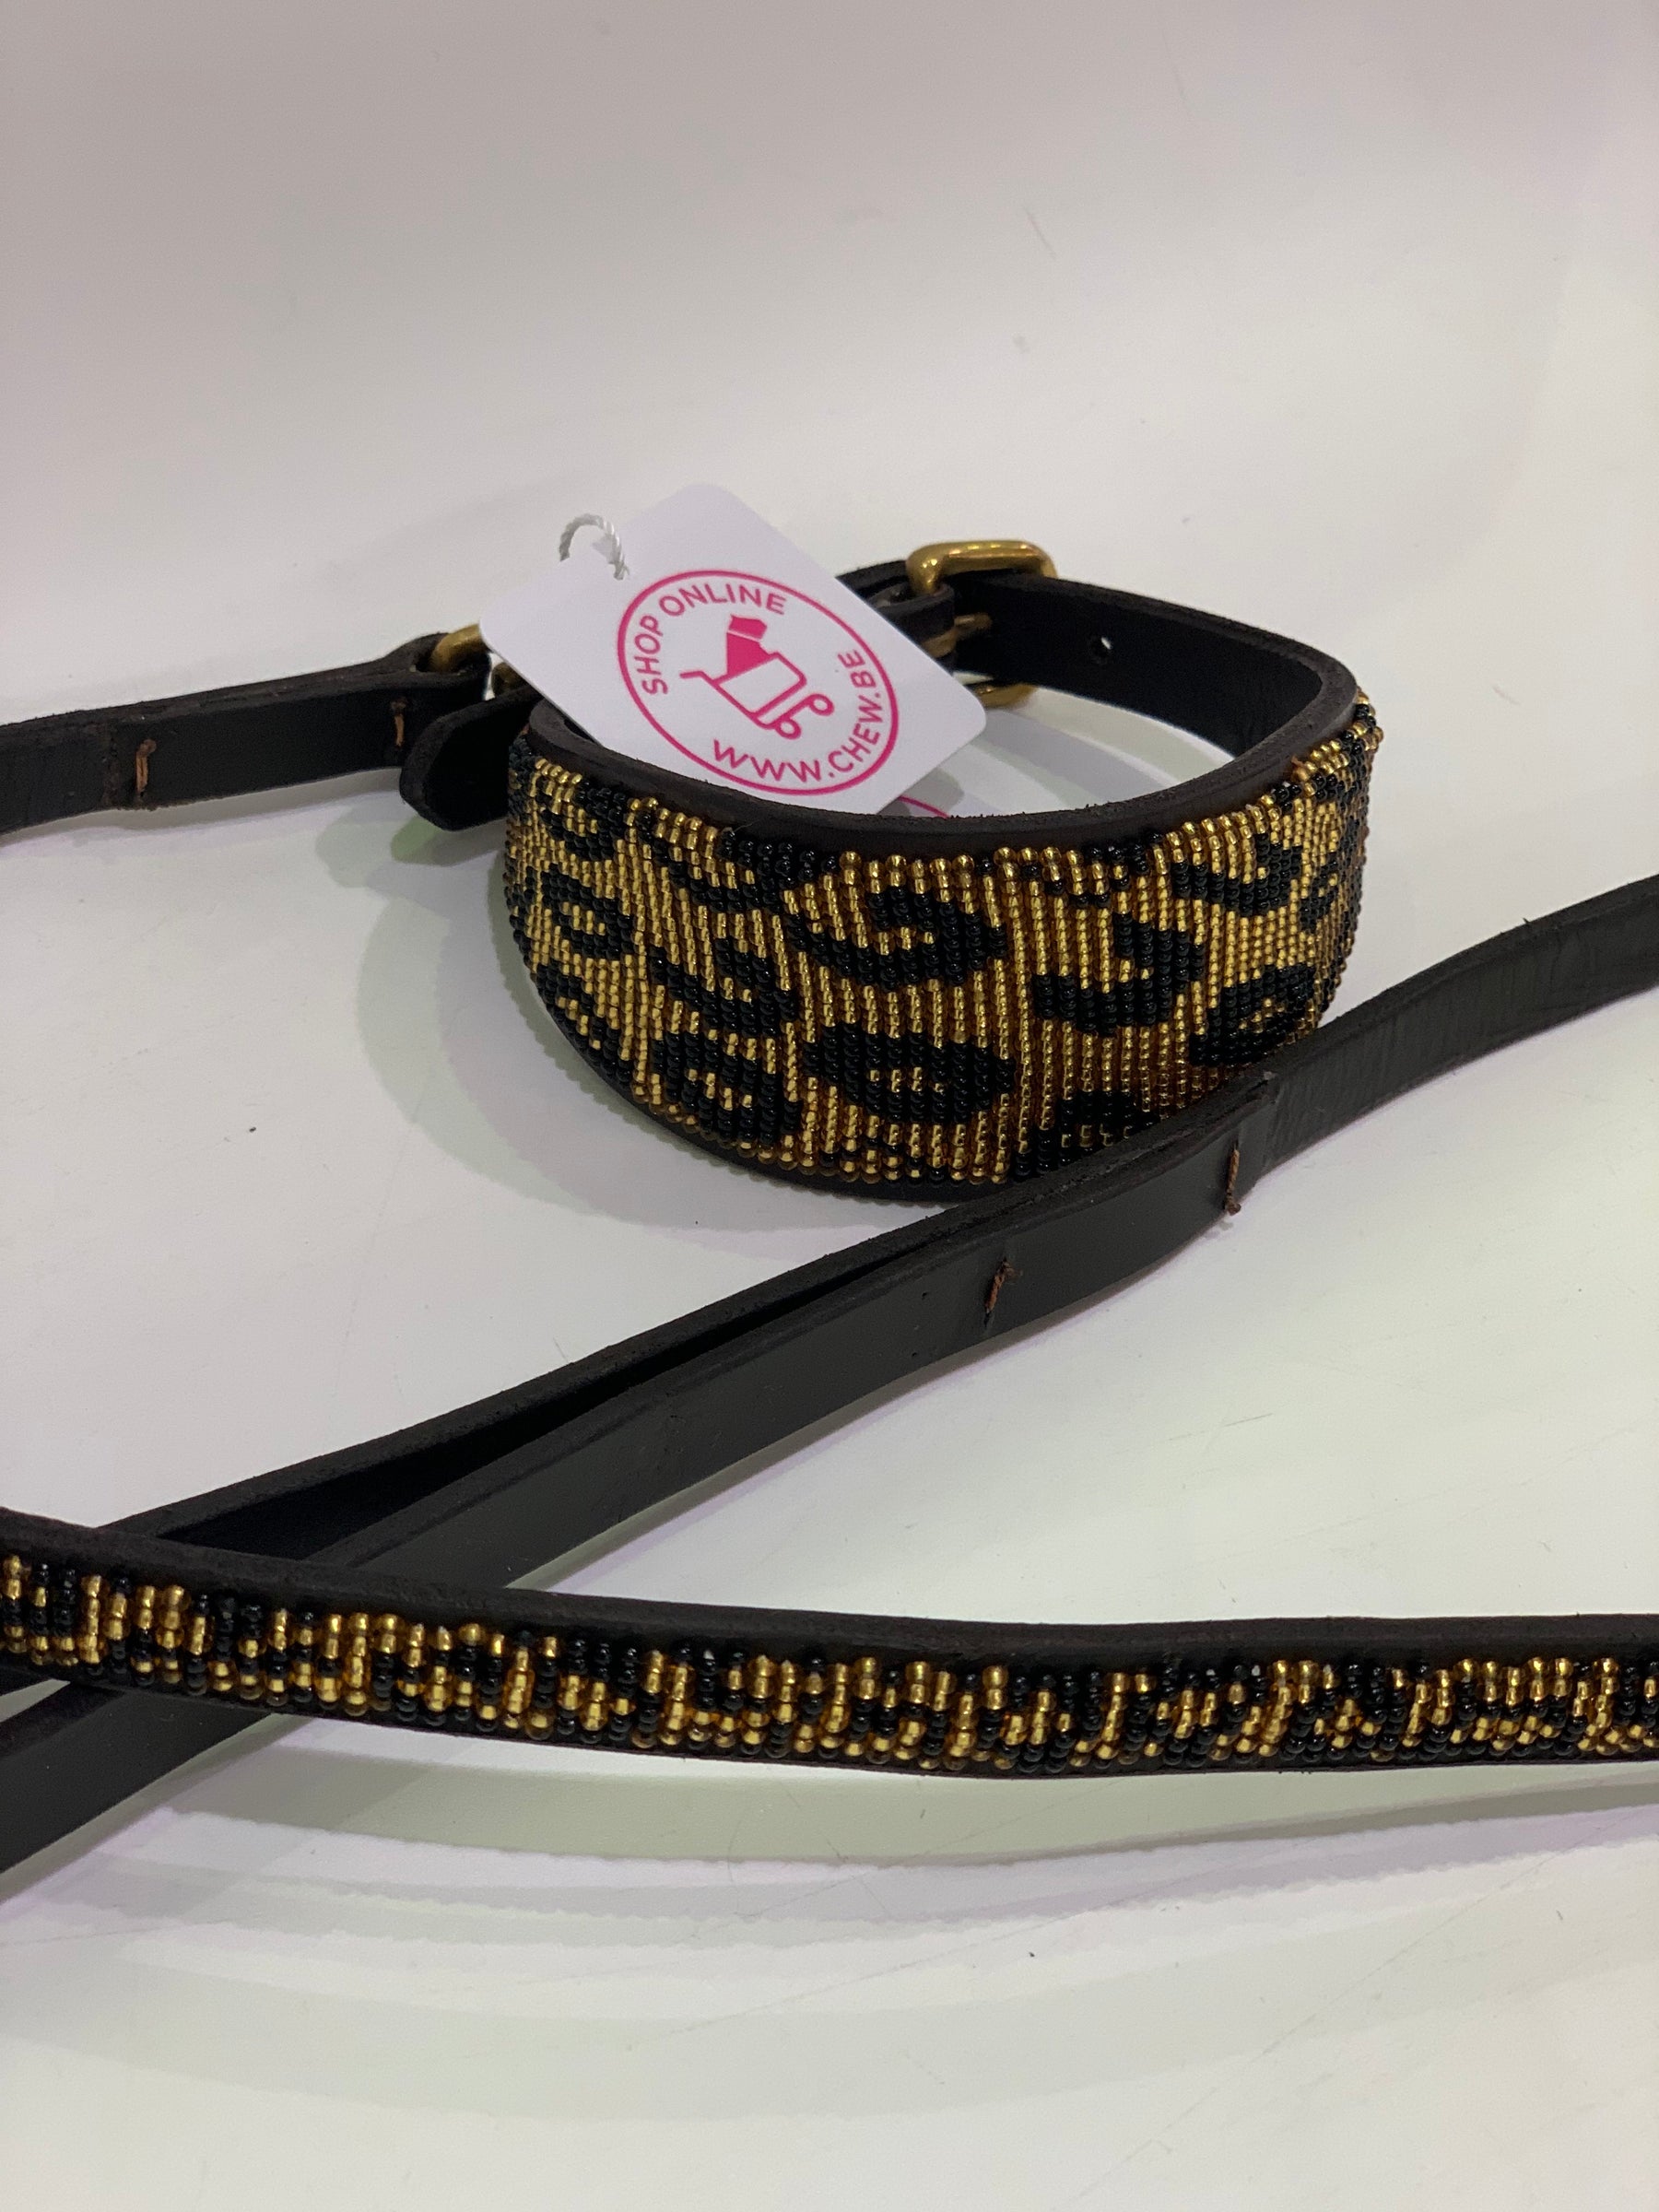 Leopard Leiband.